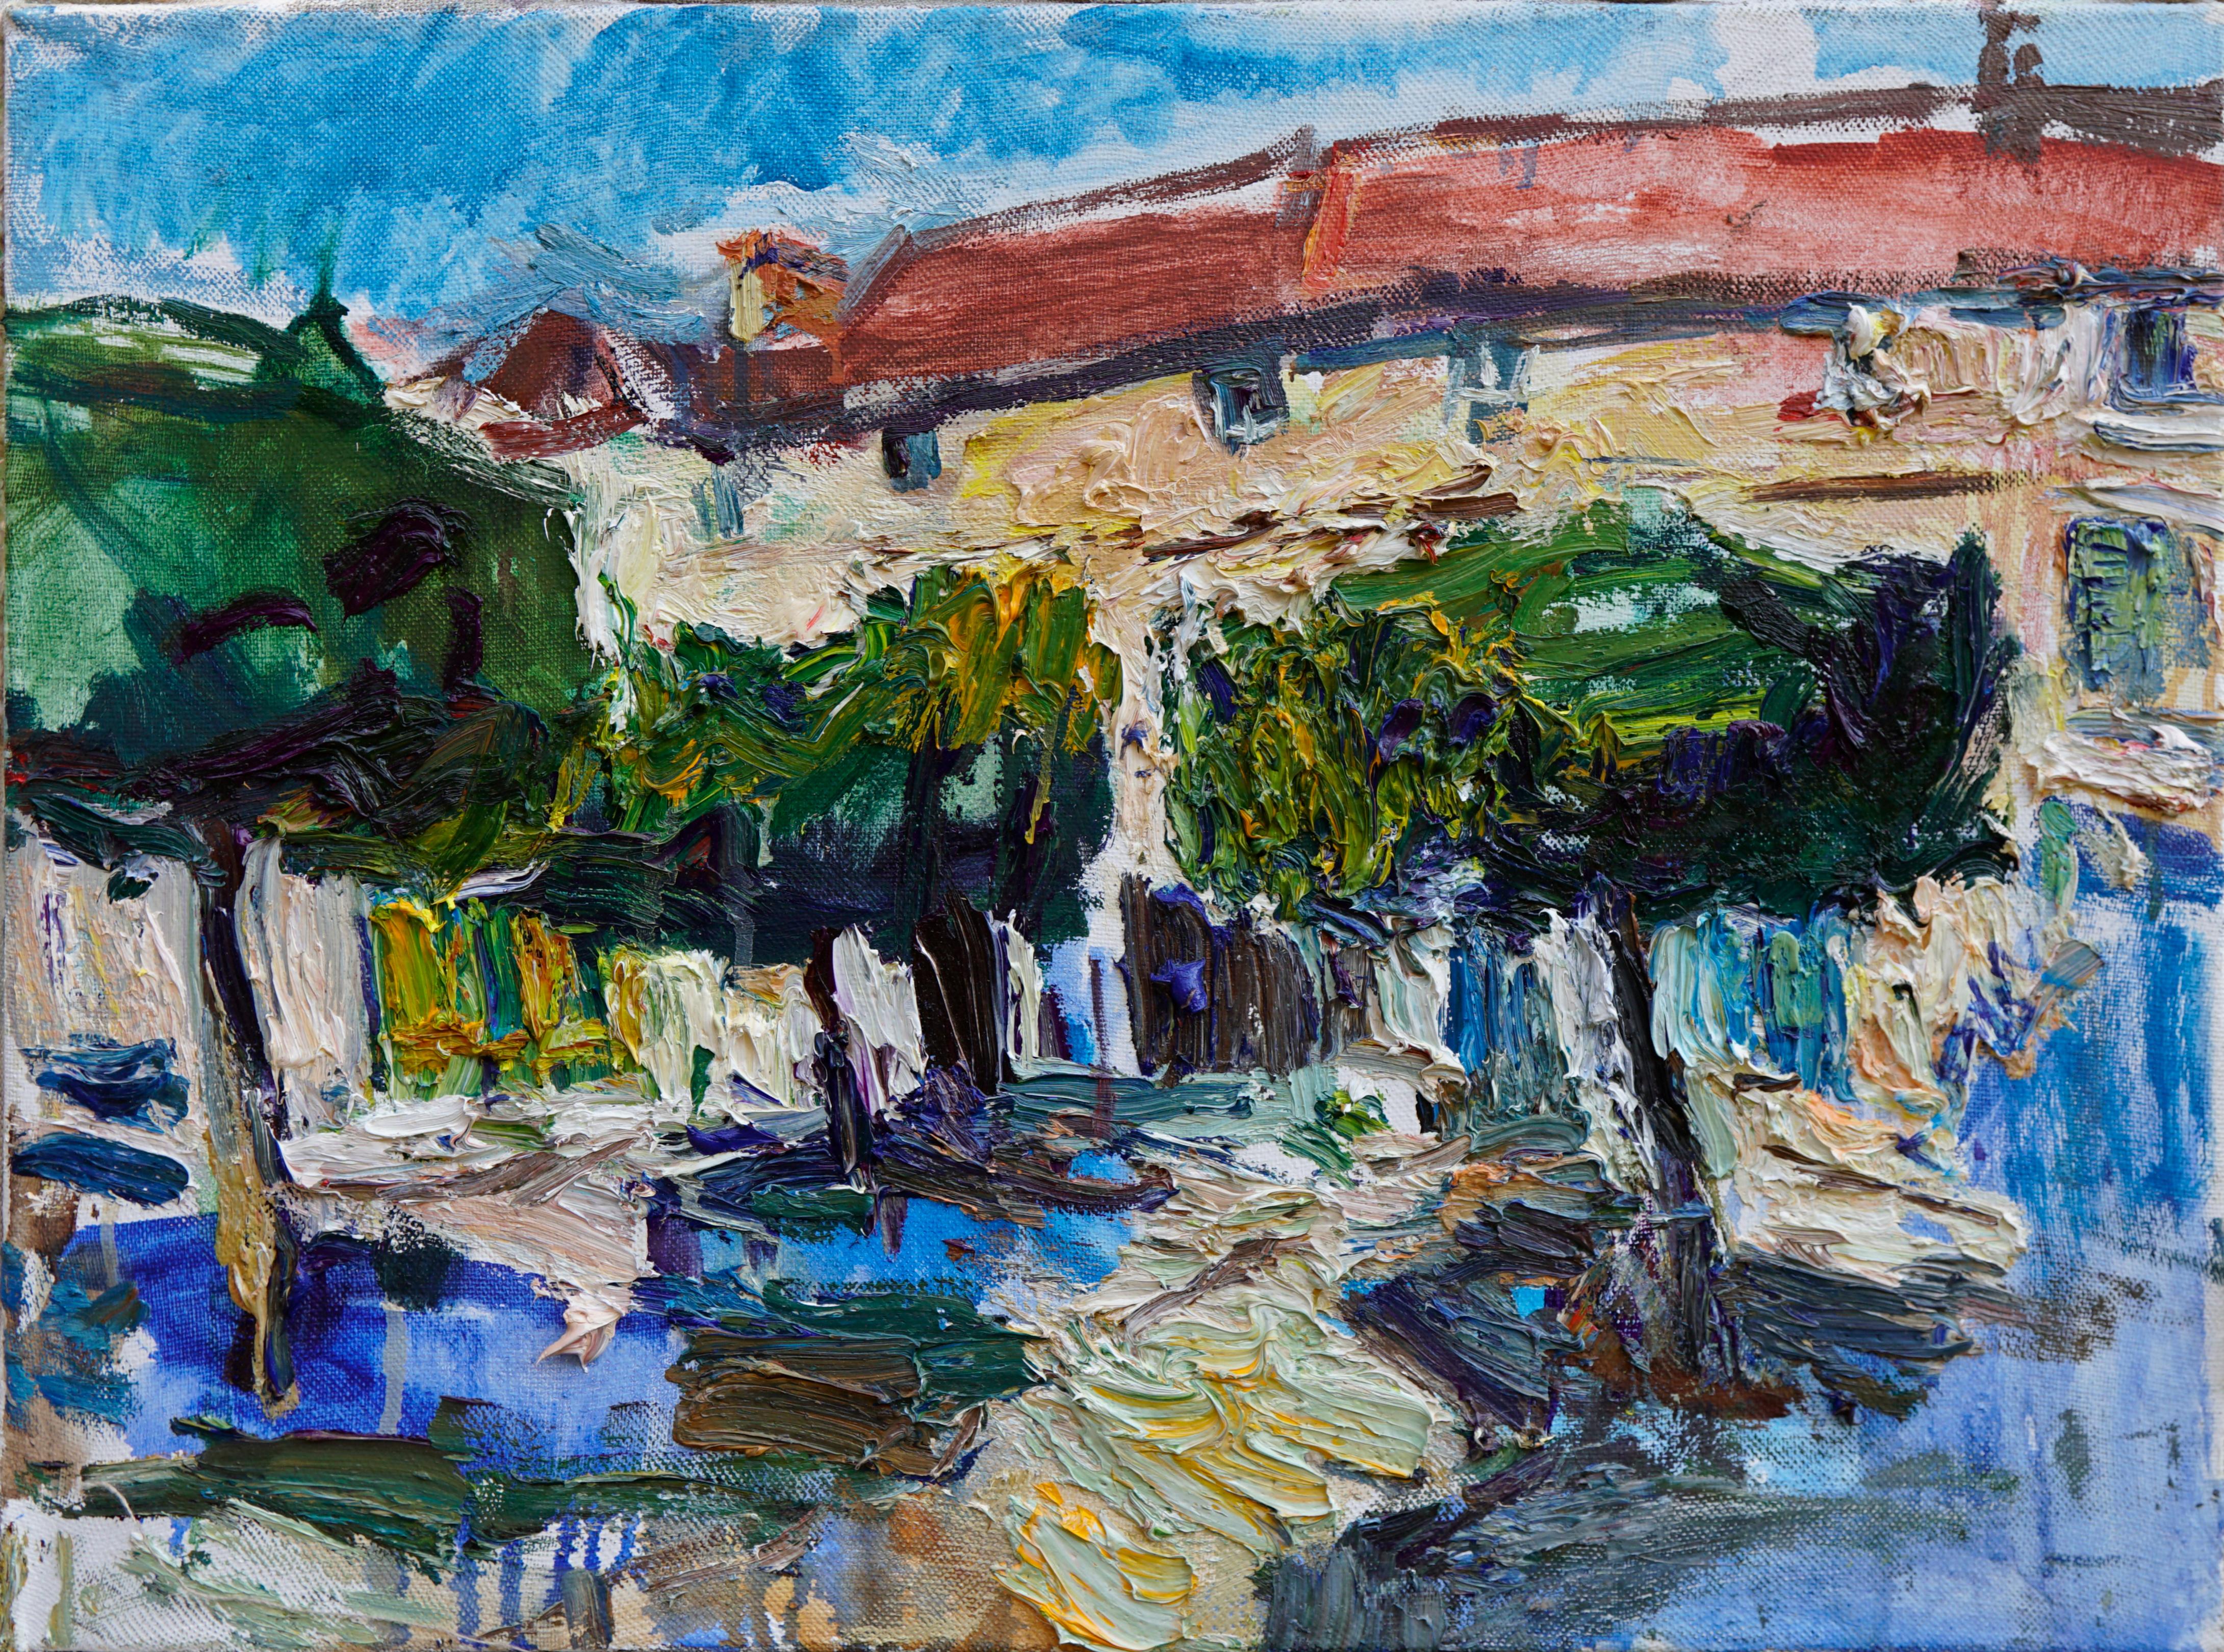 "The Central Square of Ravières" Oil painting